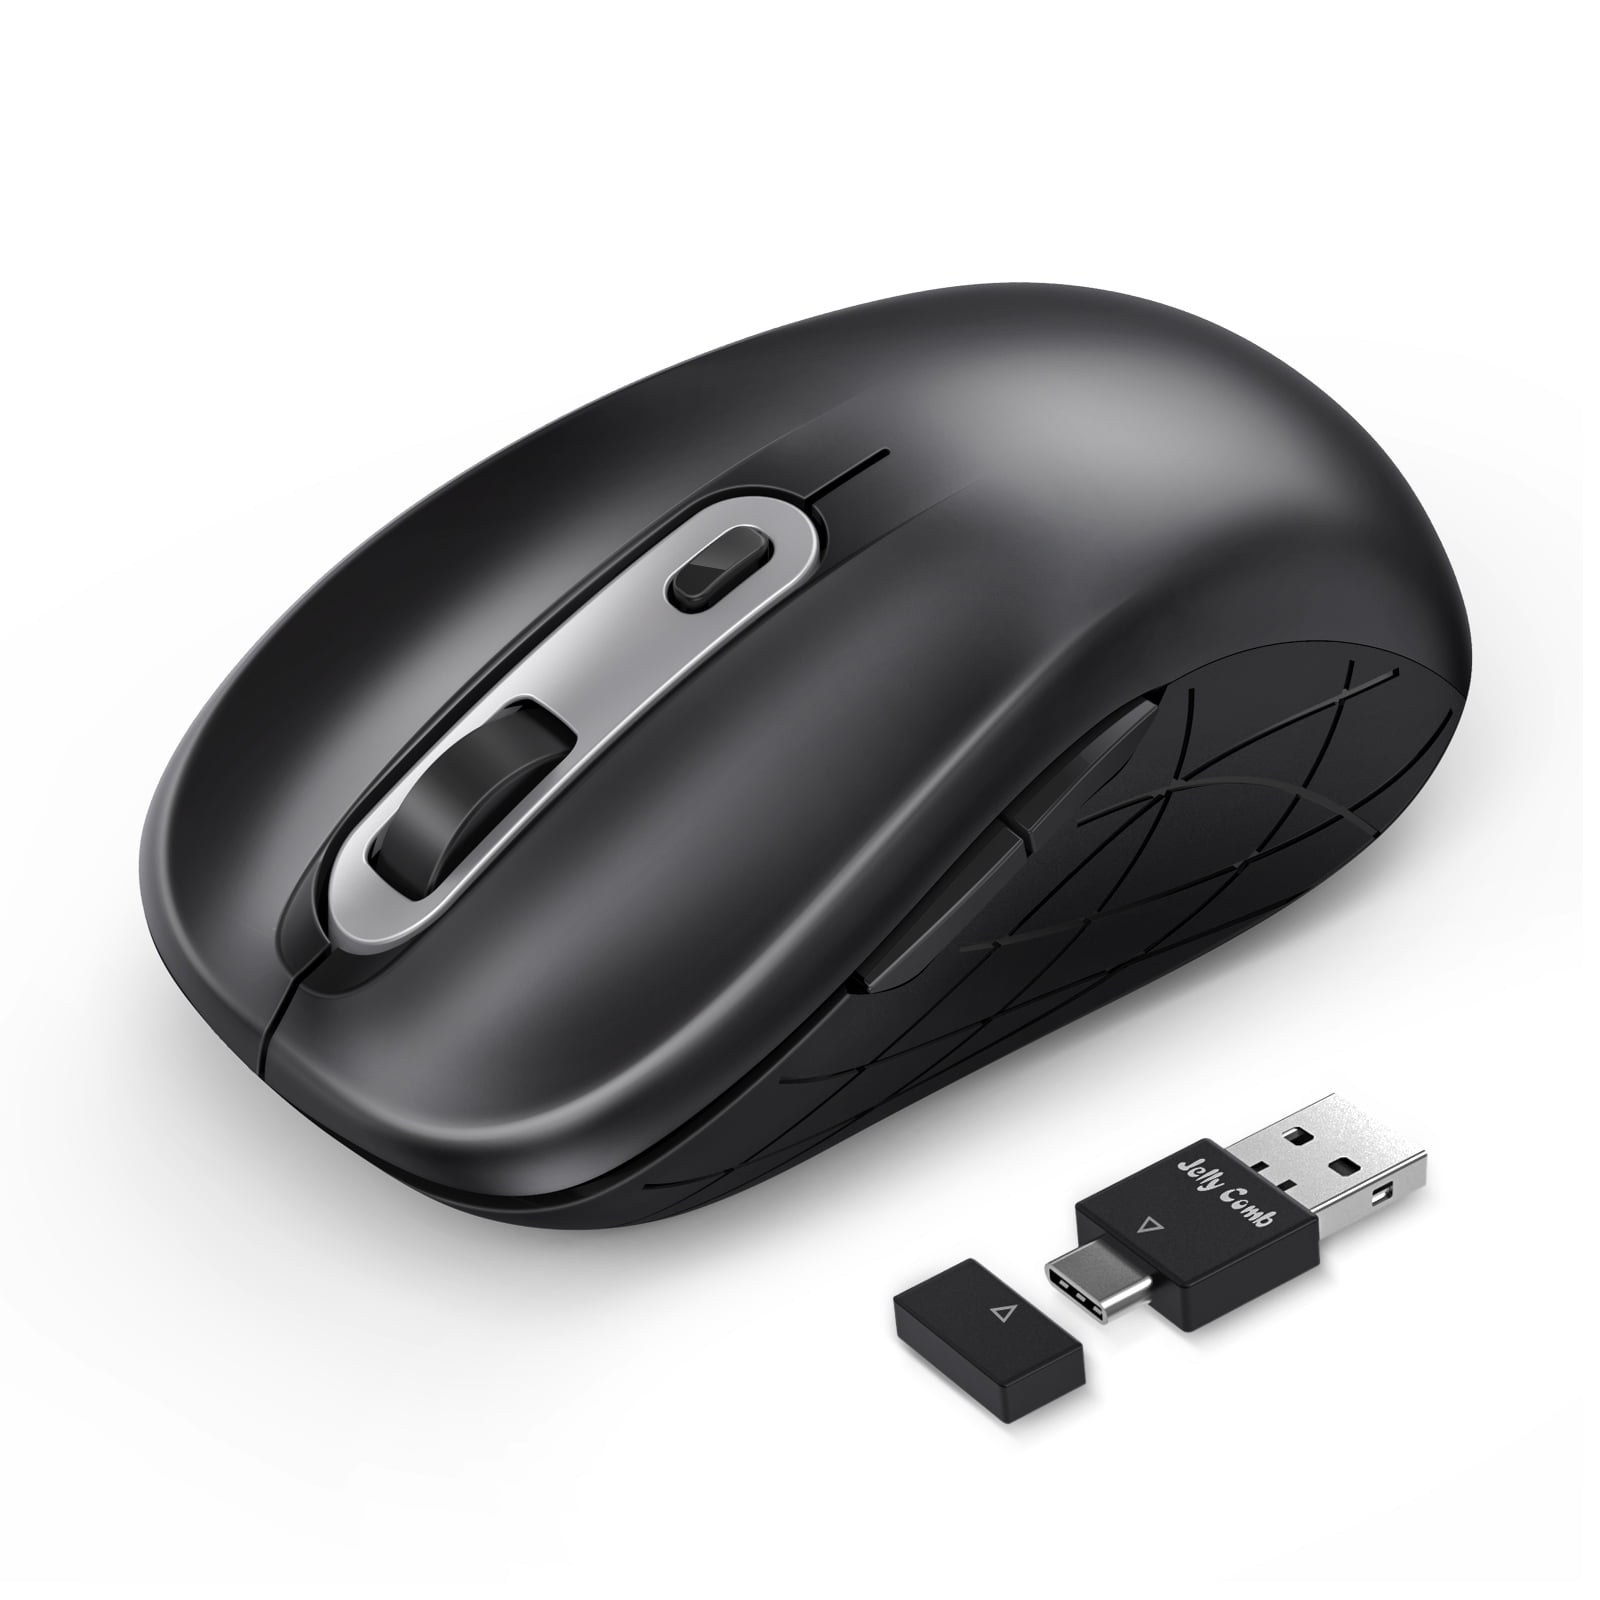 Wireless Mouse,Jelly Comb USB C Mouse,Silent Ergonomic Mouse,Computer ...